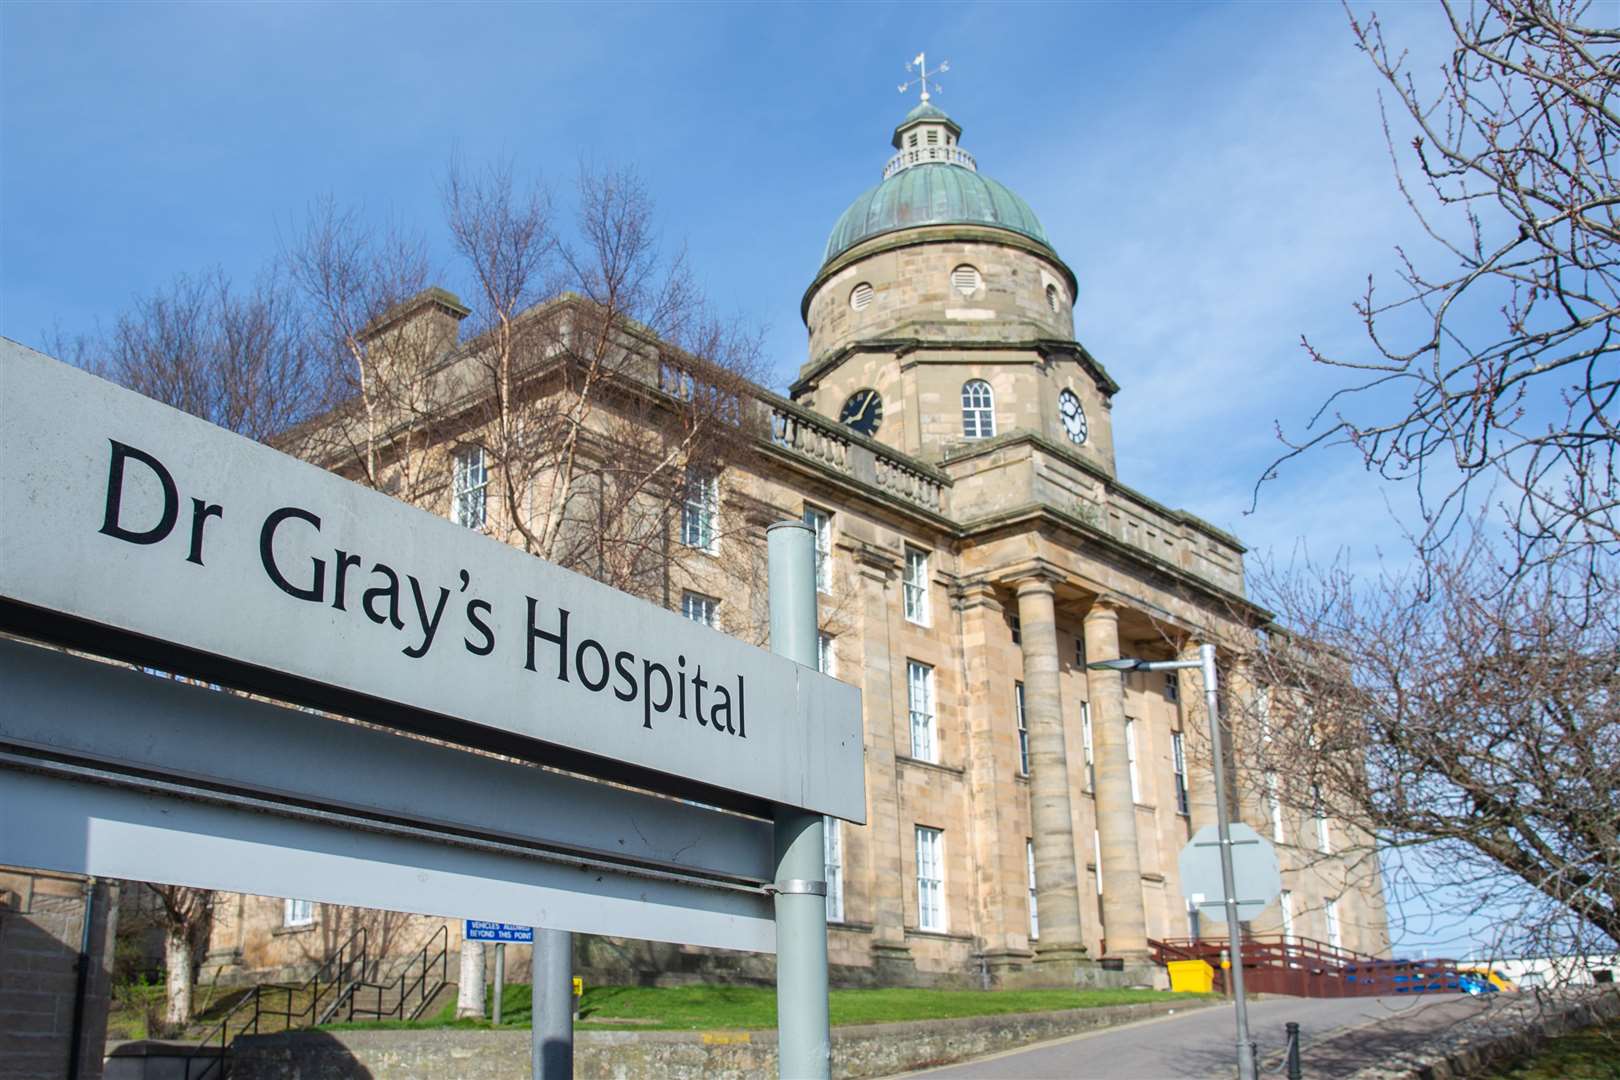 There have been no inspections at Dr Gray's Hospital for six years. Picture: Daniel Forsyth